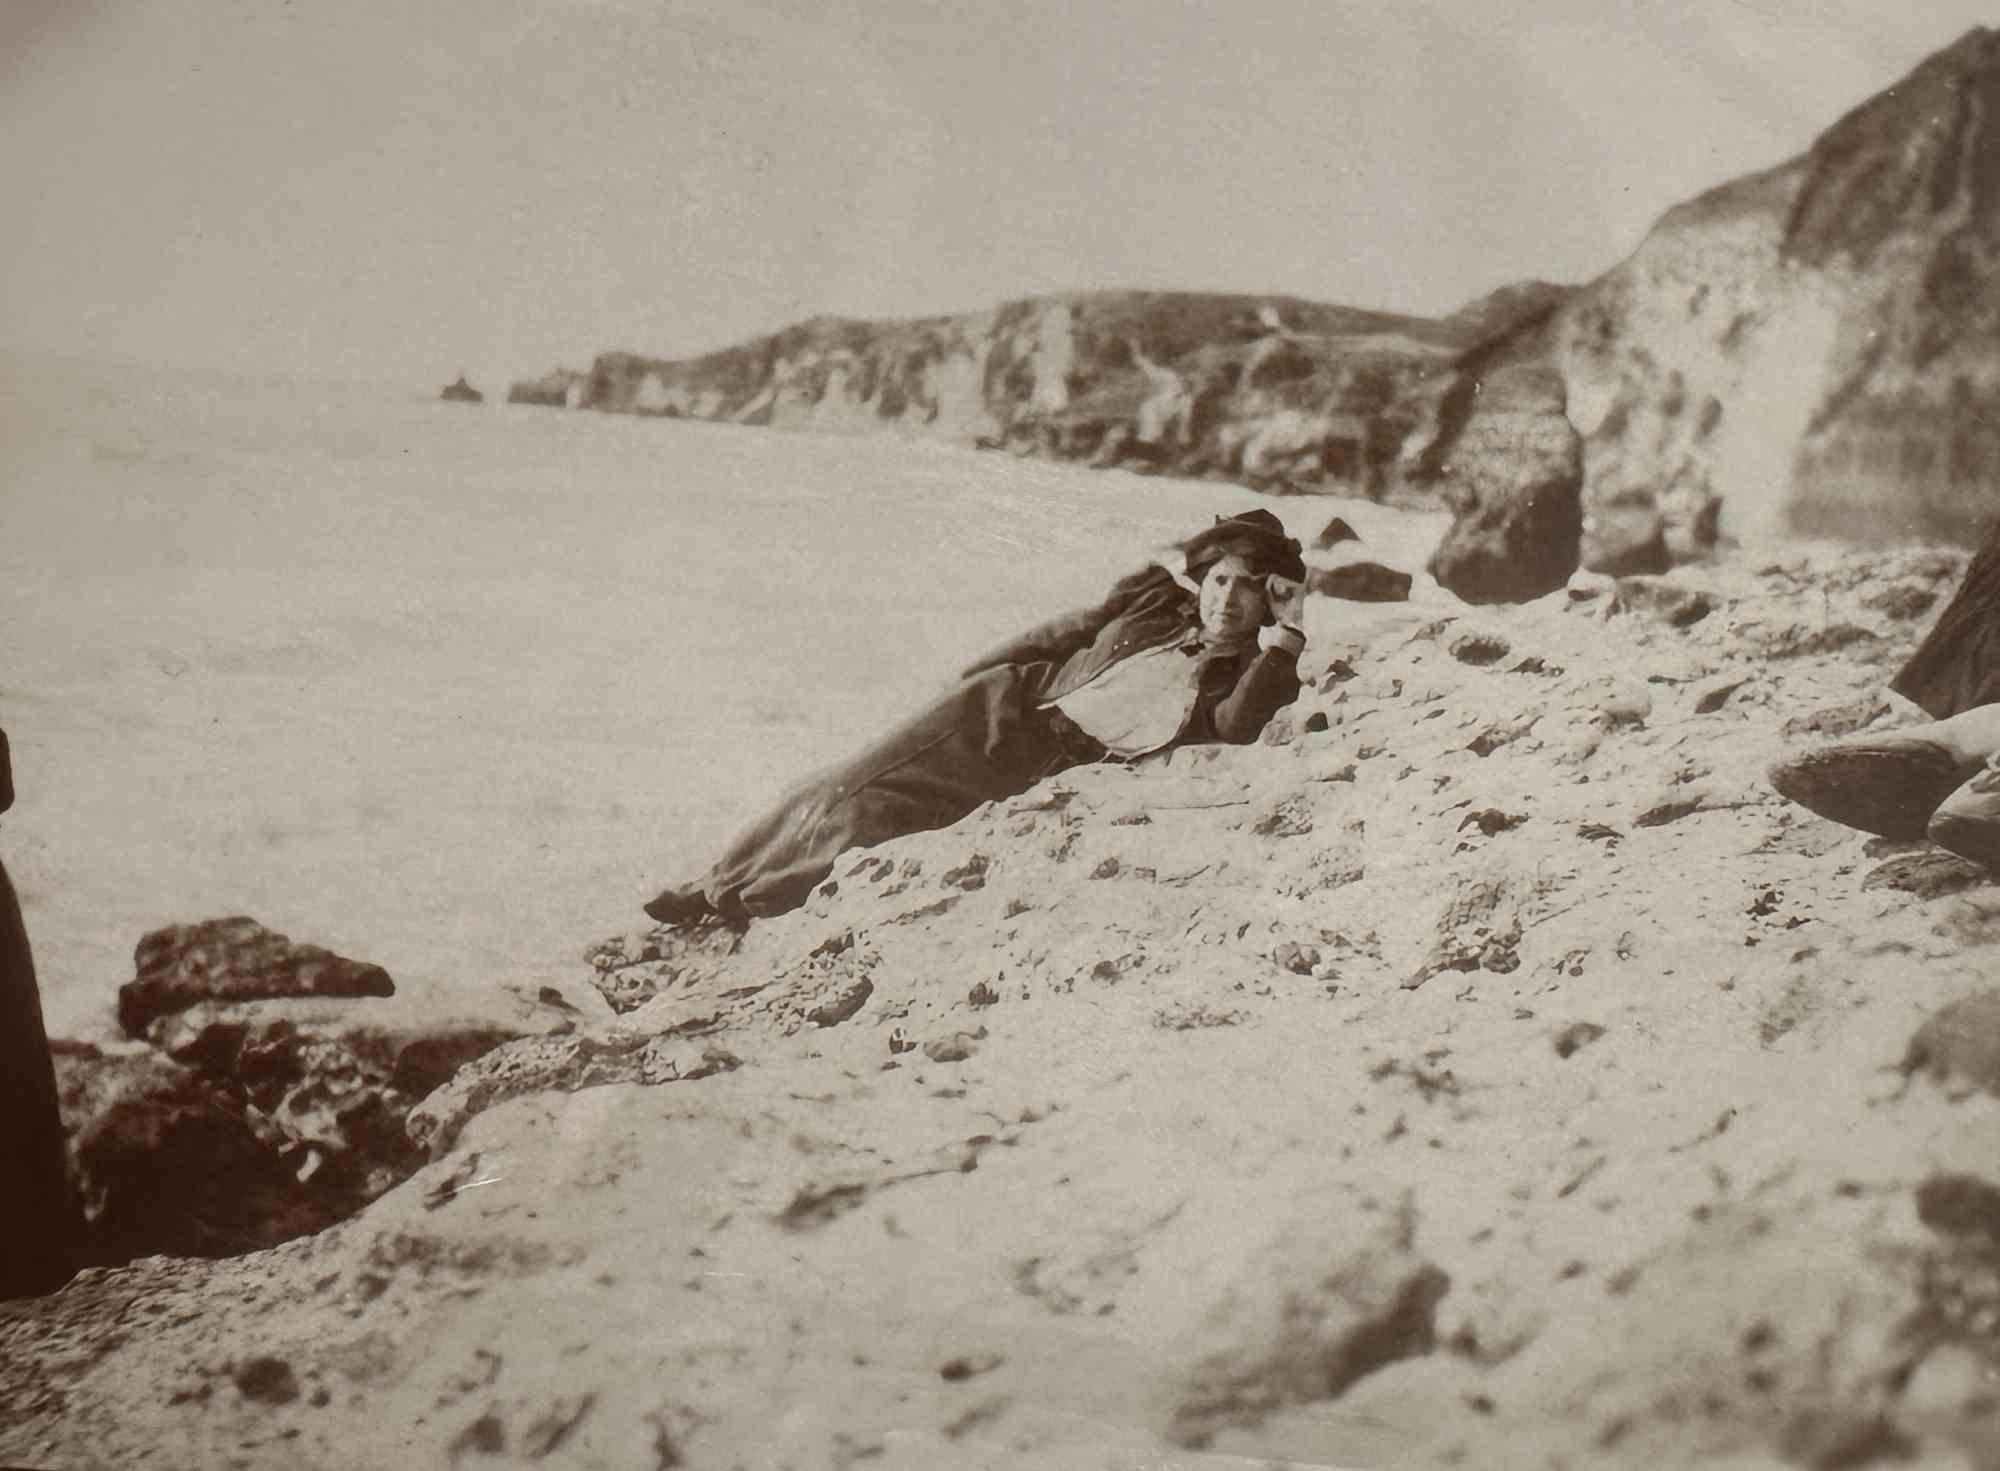 Unknown Figurative Photograph - The Old Days  Photo - Woman at the Beach - Vintage Photo - Early 20th Century